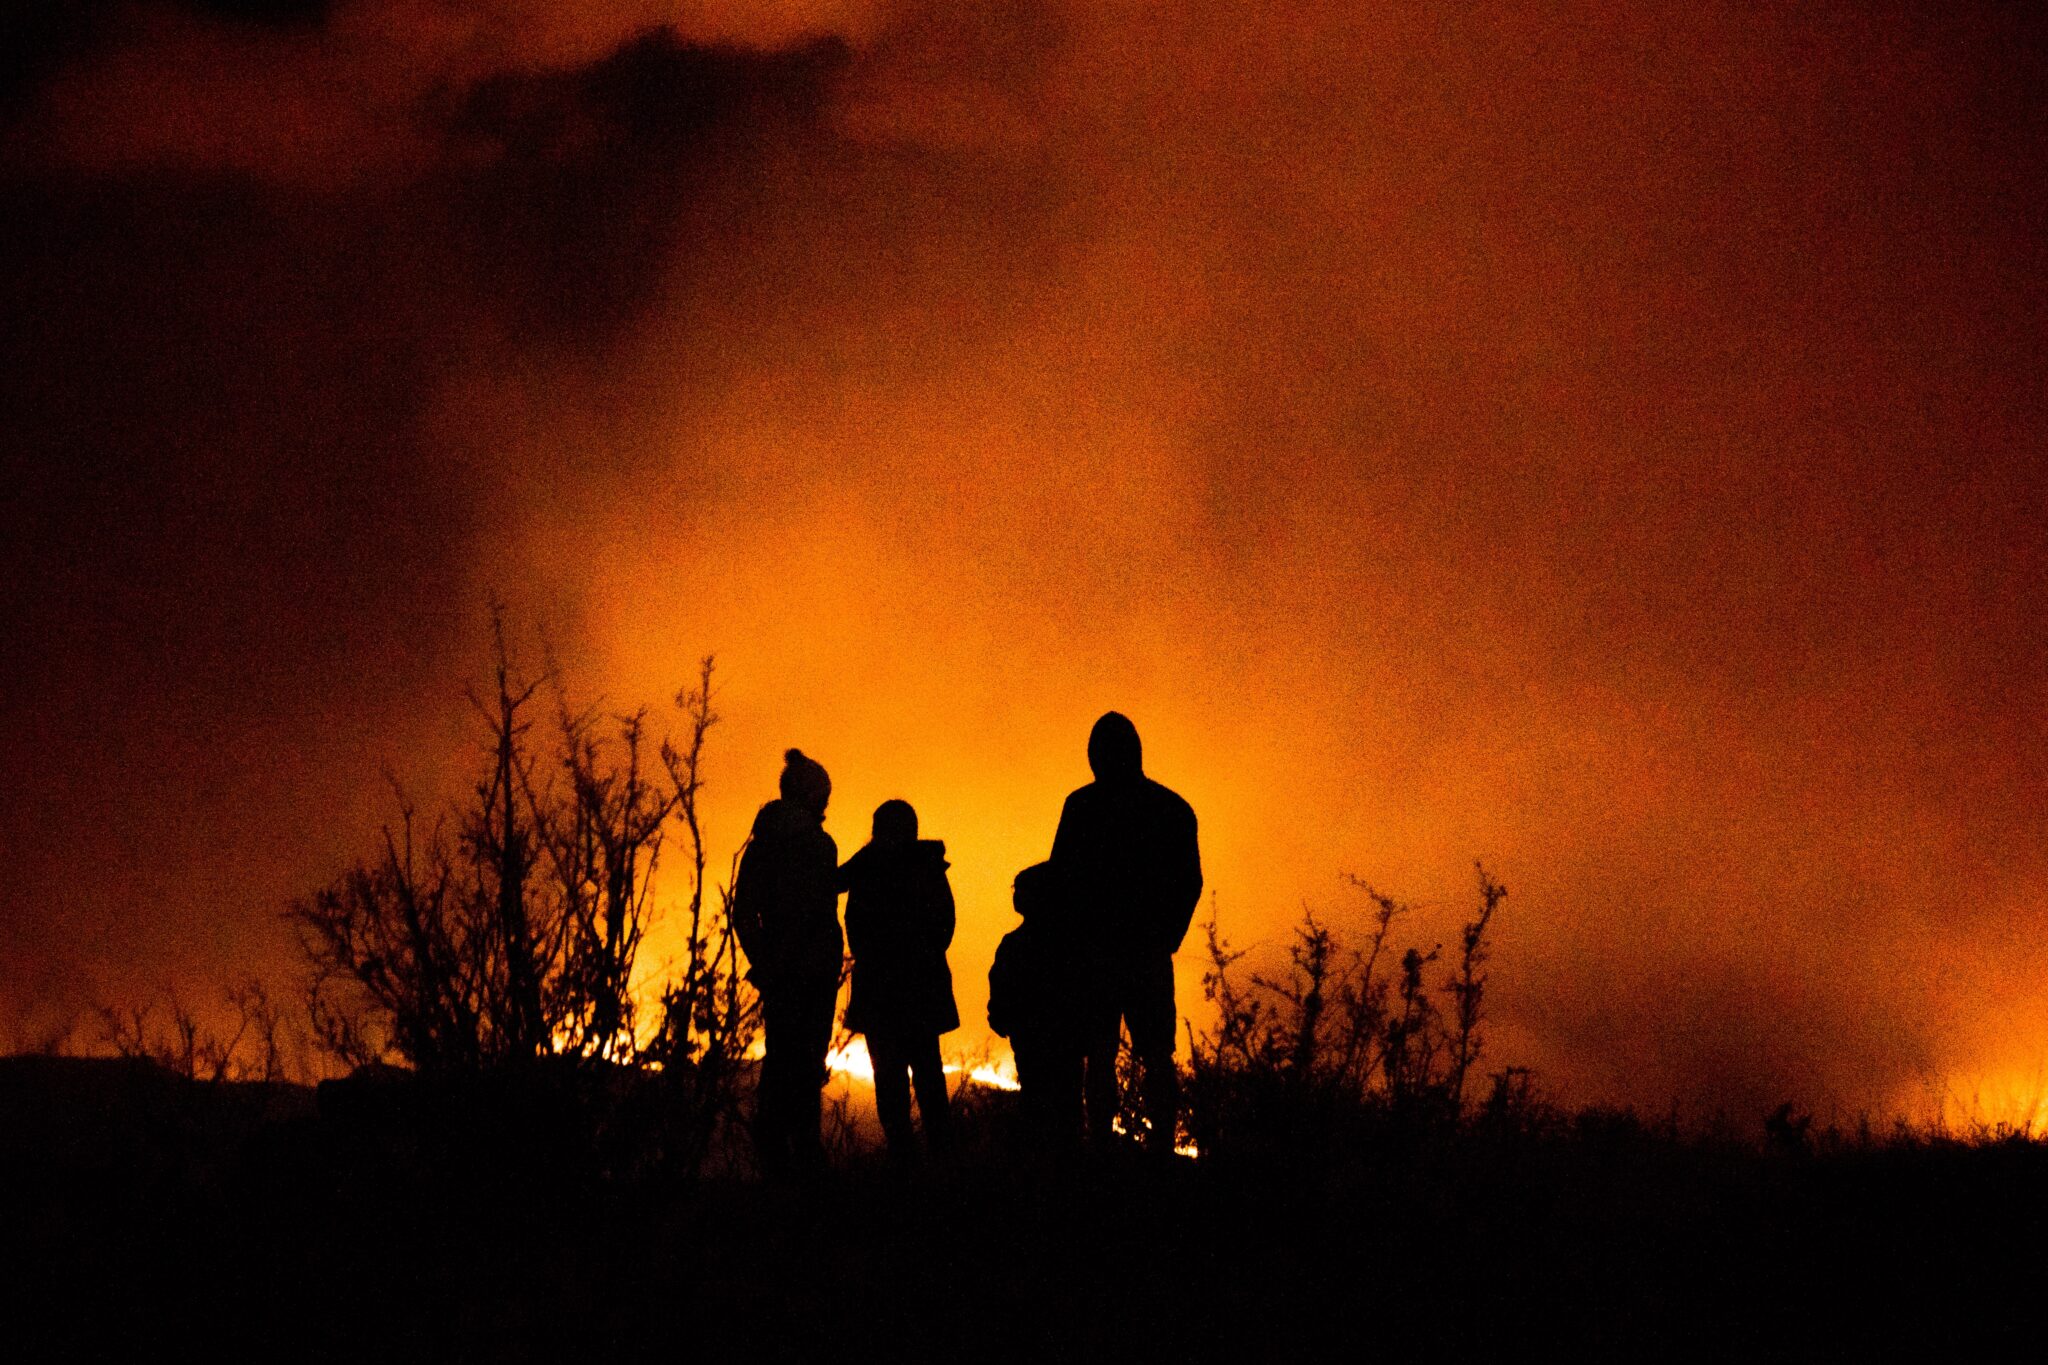 A raging wildfire at night with a family in the foreground watching.